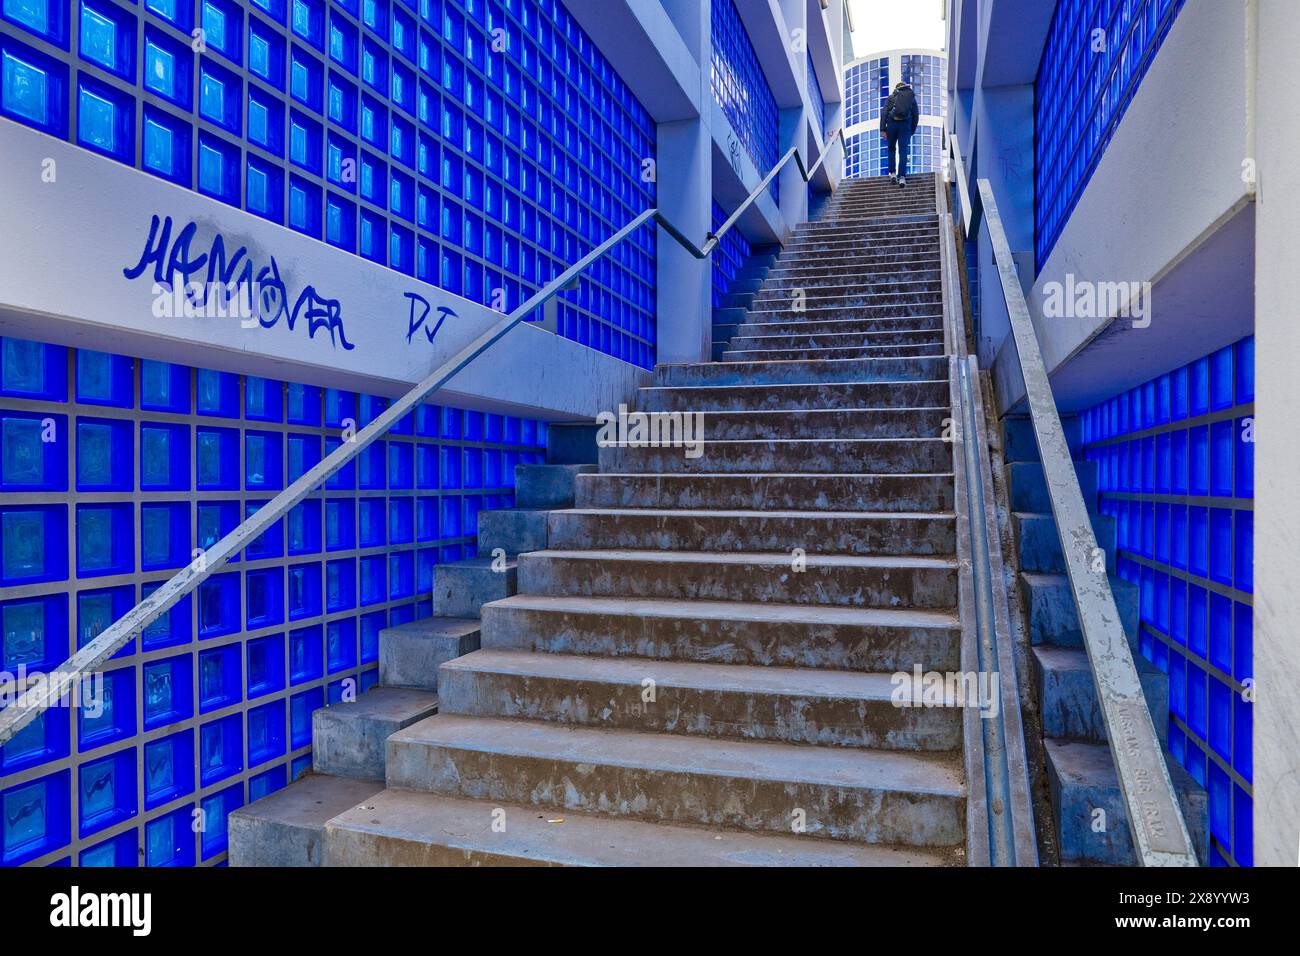 entrance to Hanover-Nordstadt railway station, blue glass blocks and exposed concrete, project for Expo 2000, Germany, Lower Saxony, Hanover Stock Photo